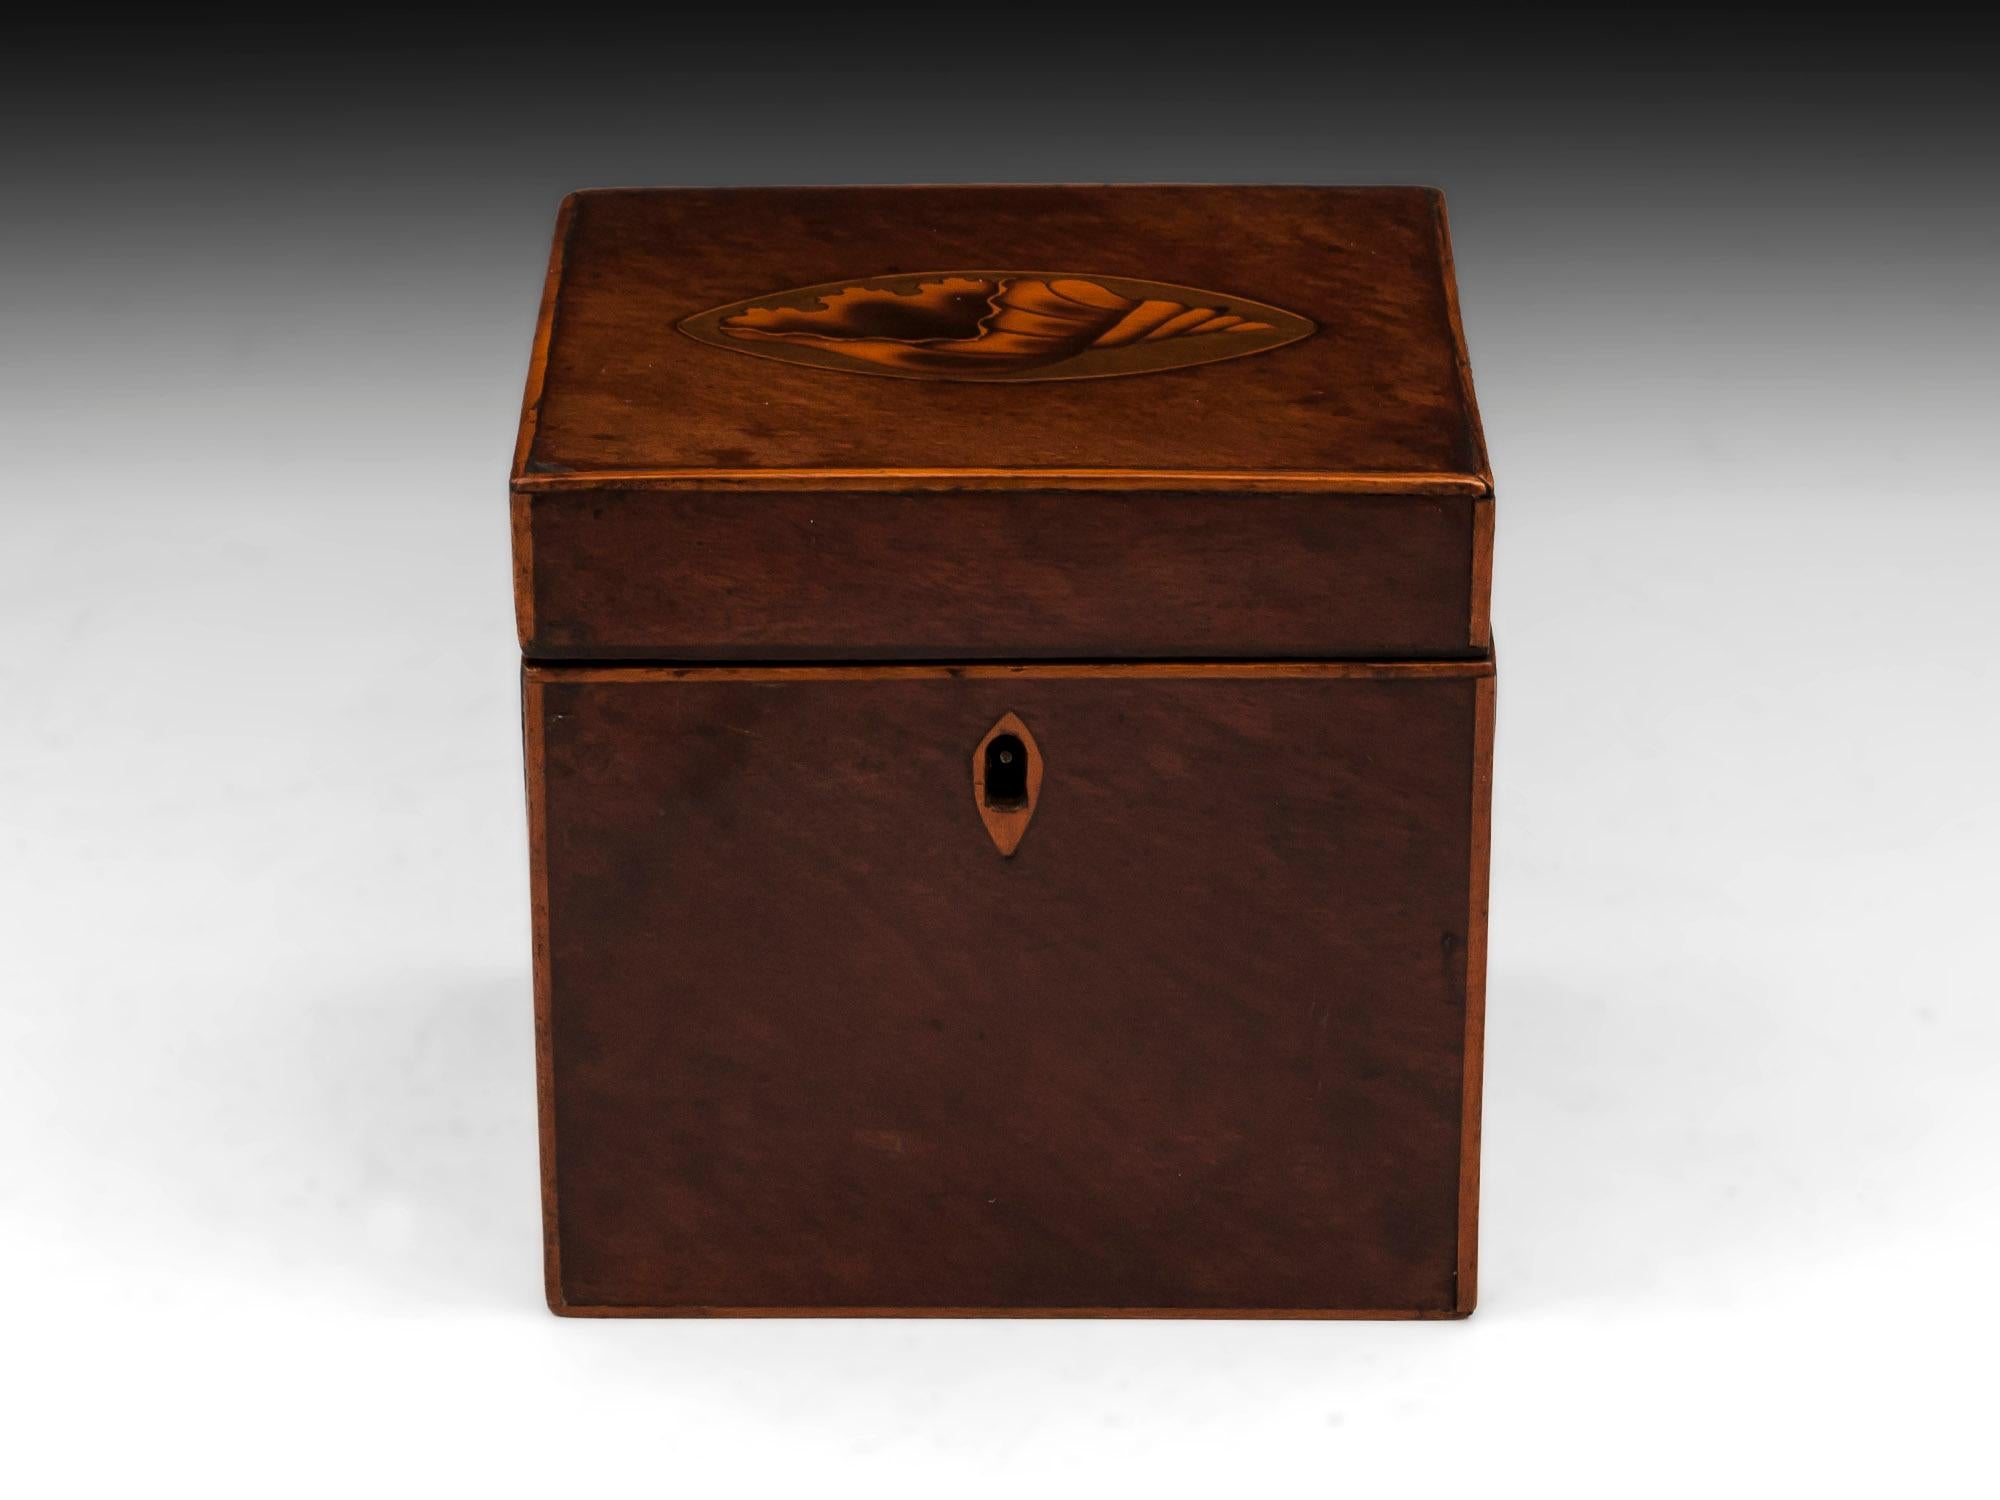 Antique single tea caddy veneered in mahogany with beautiful conch shell inlay on the top and boxwood edging.
The interior features a single lid with floral inlay and turned bone handle.
This tea caddy comes with a fully working lock and tasseled